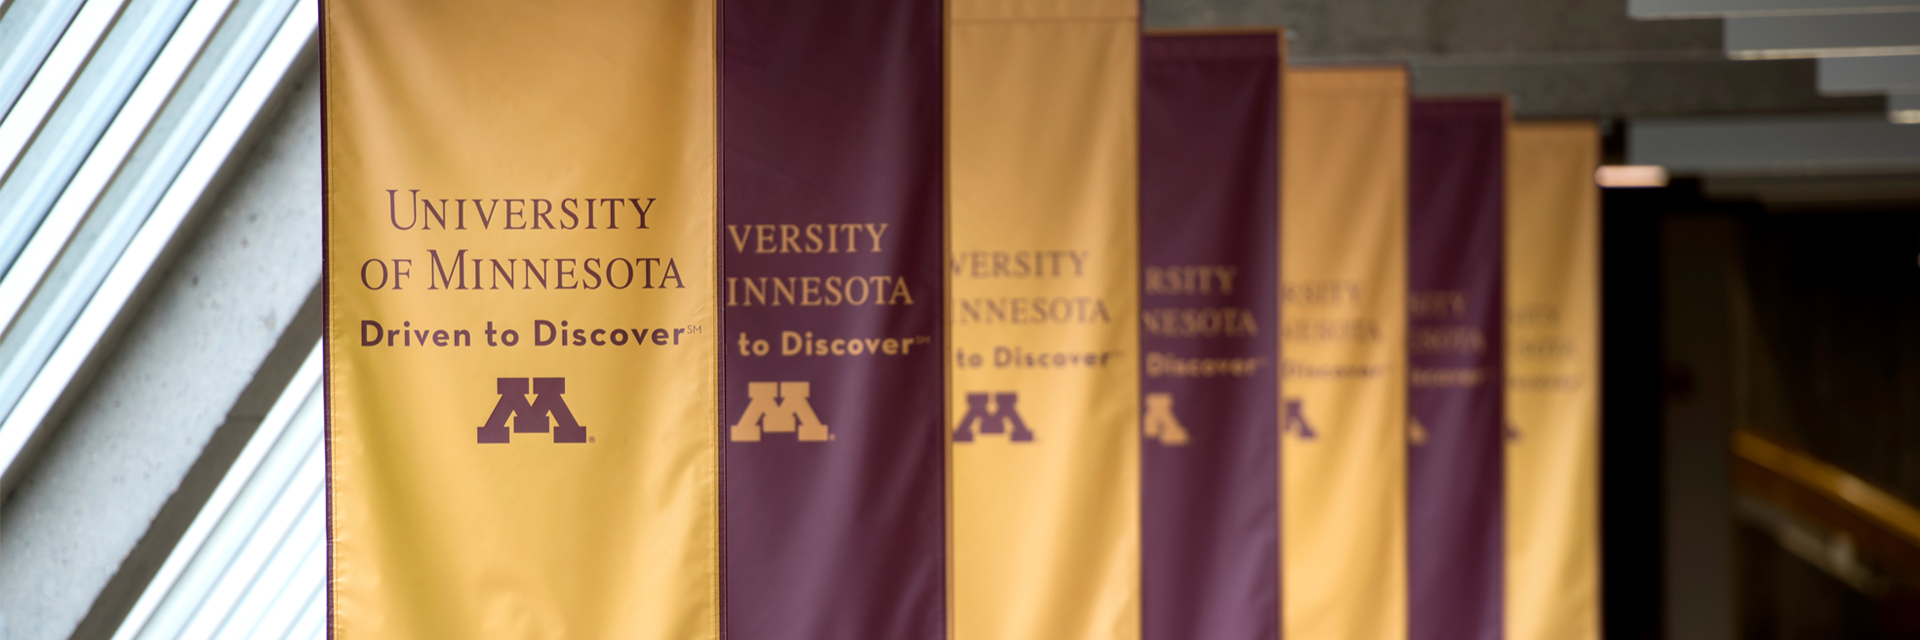 Image of UMN banners hanging in buidling